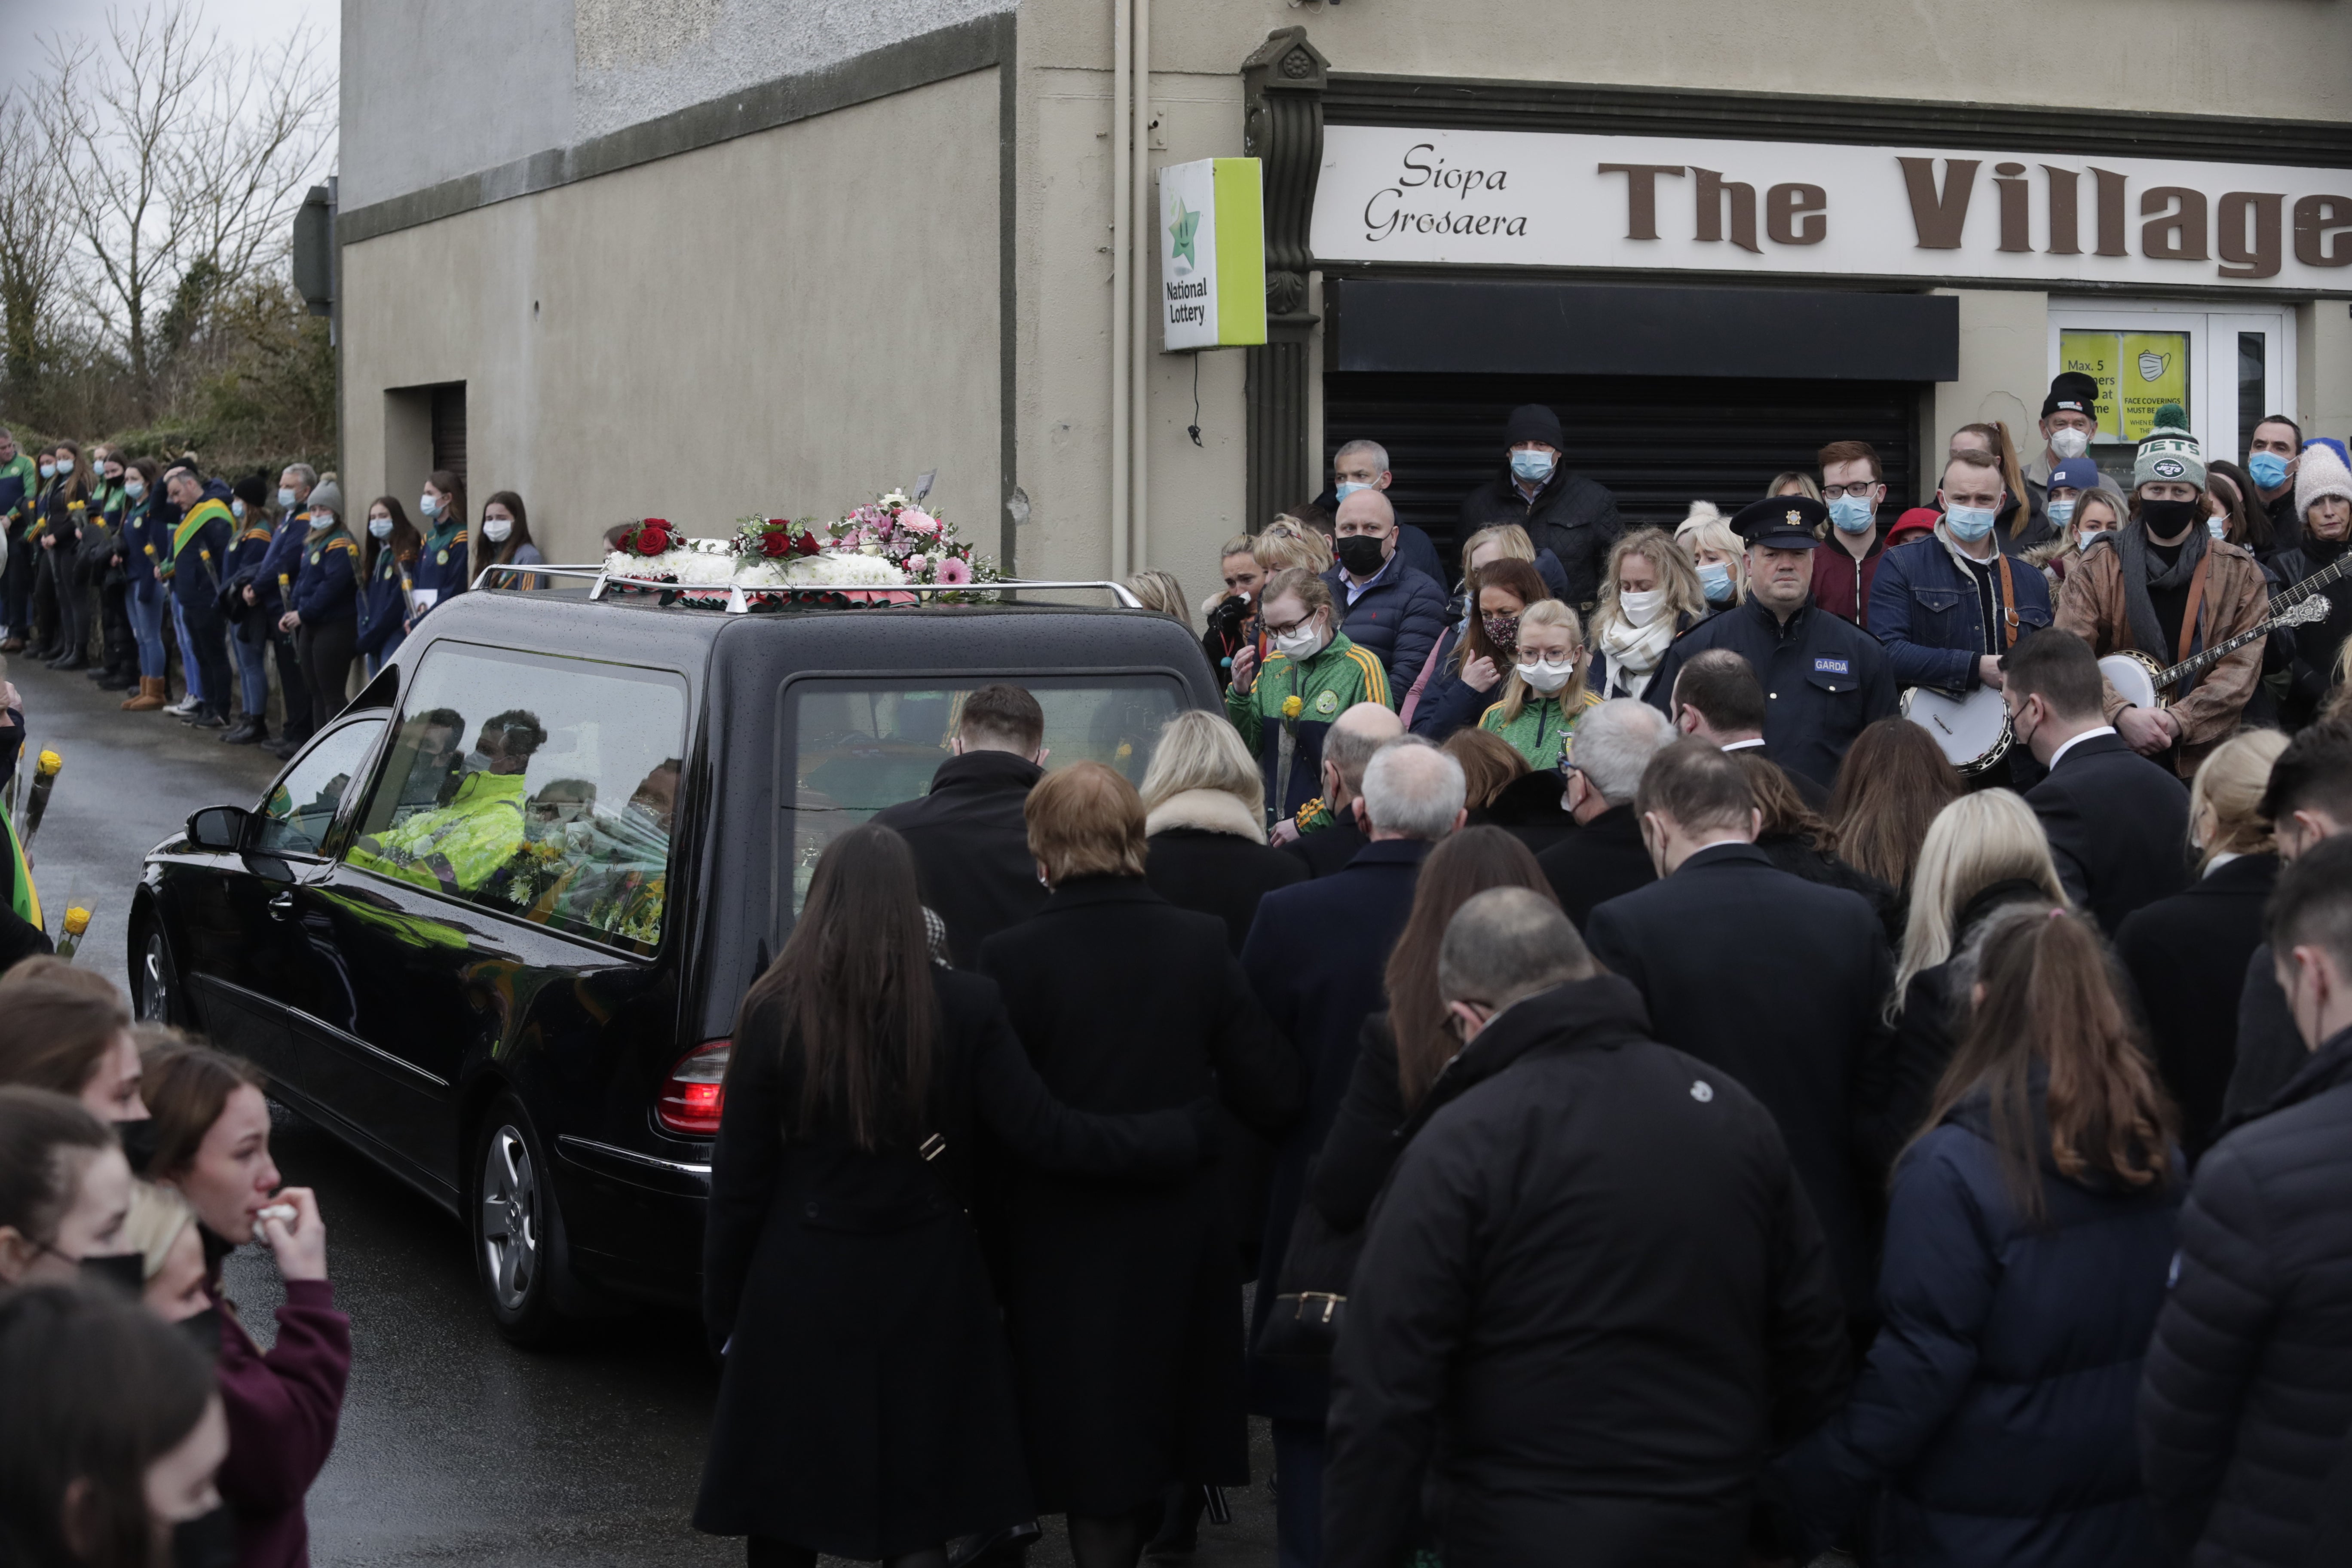 Mourners walk behind he hearse carrying the coffin as it leaves St Brigid’s Church (Damien Eagers/PA)